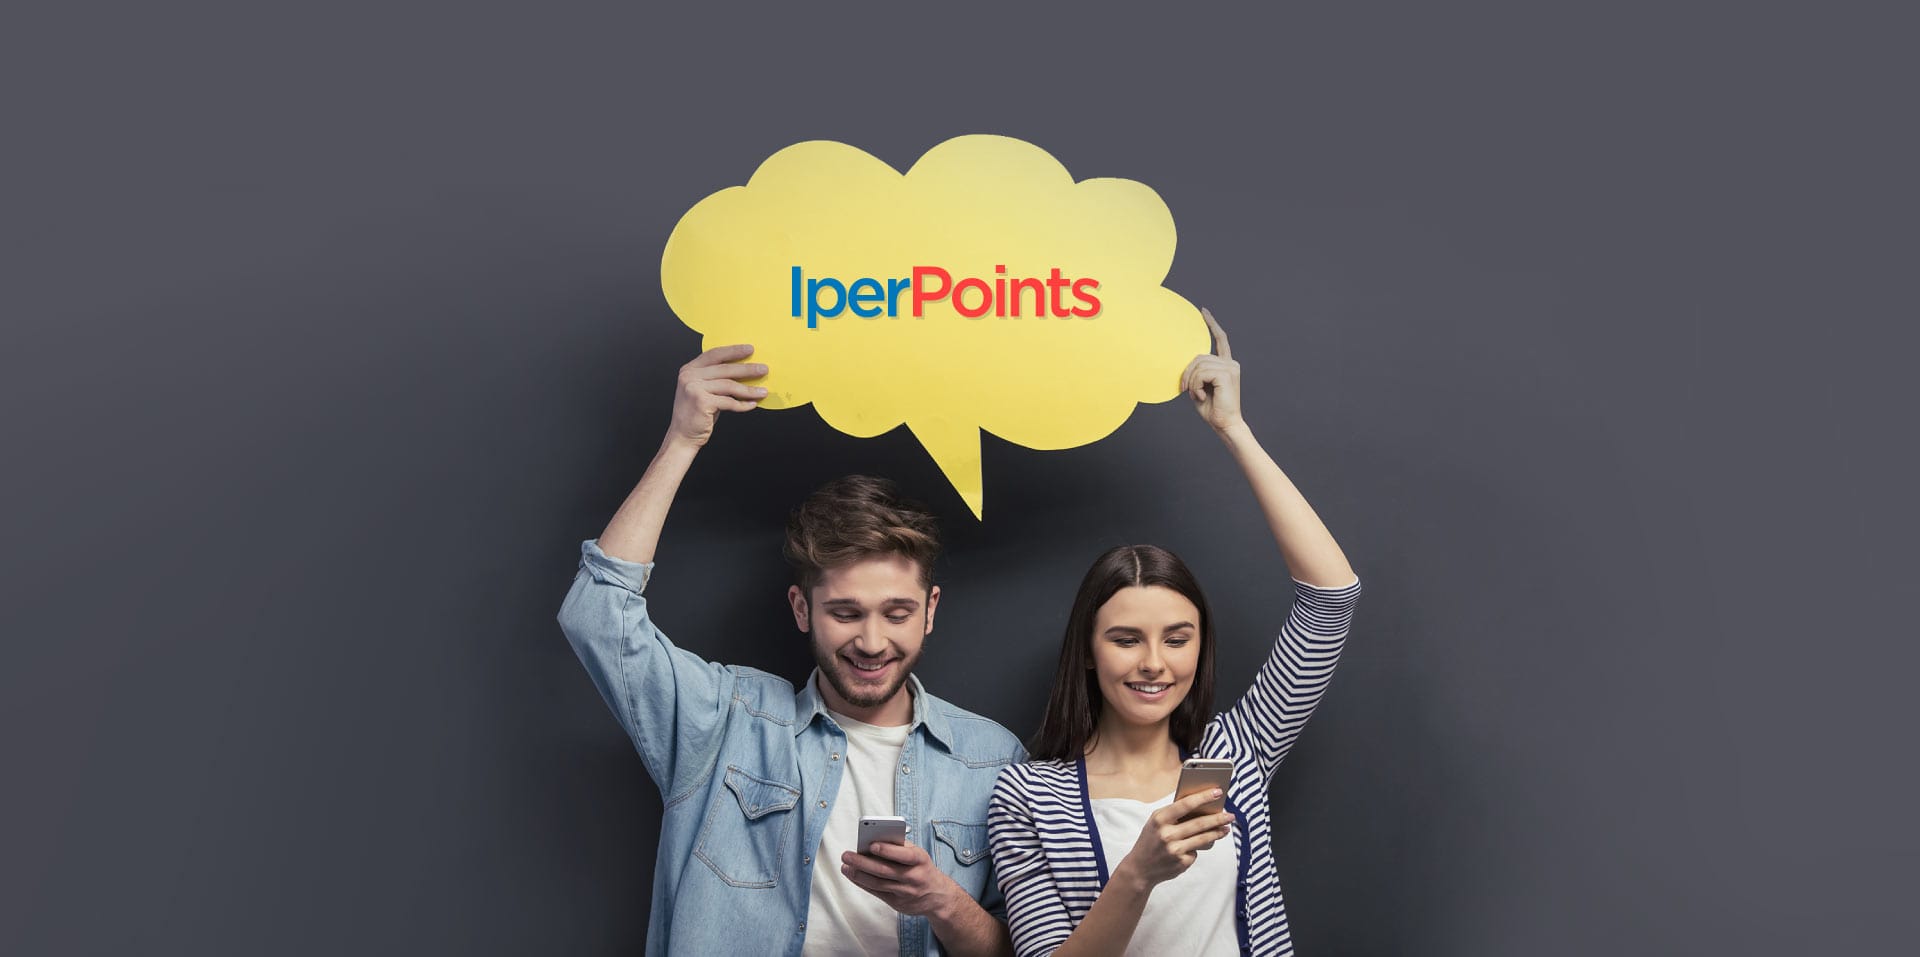 iperpoints people